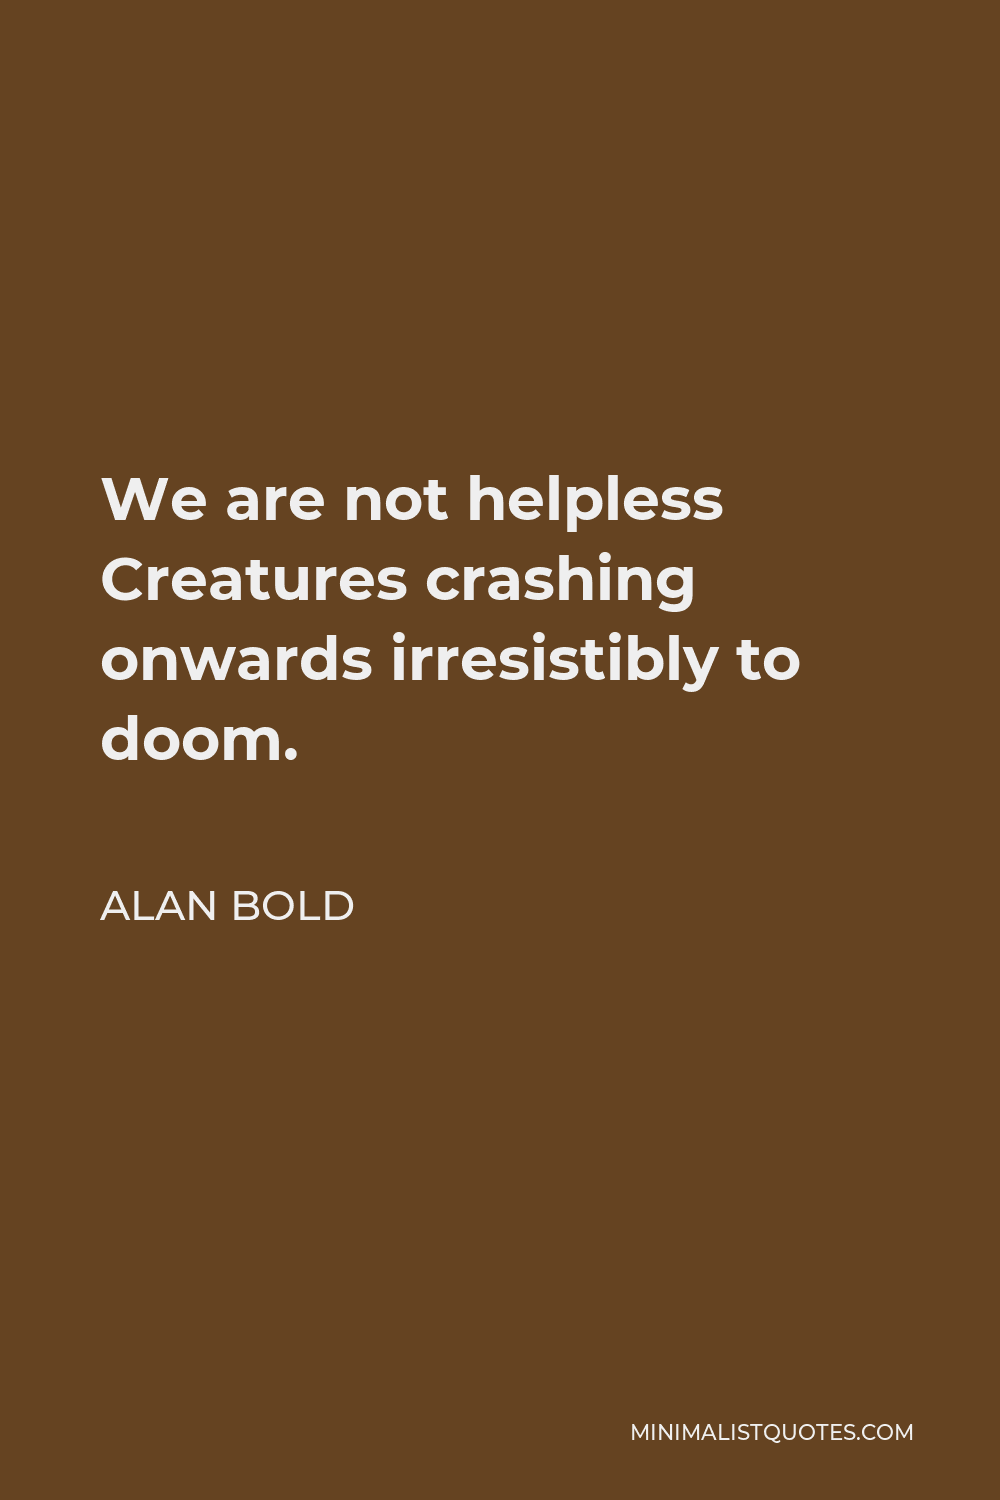 Alan Bold Quote - We are not helpless Creatures crashing onwards irresistibly to doom.